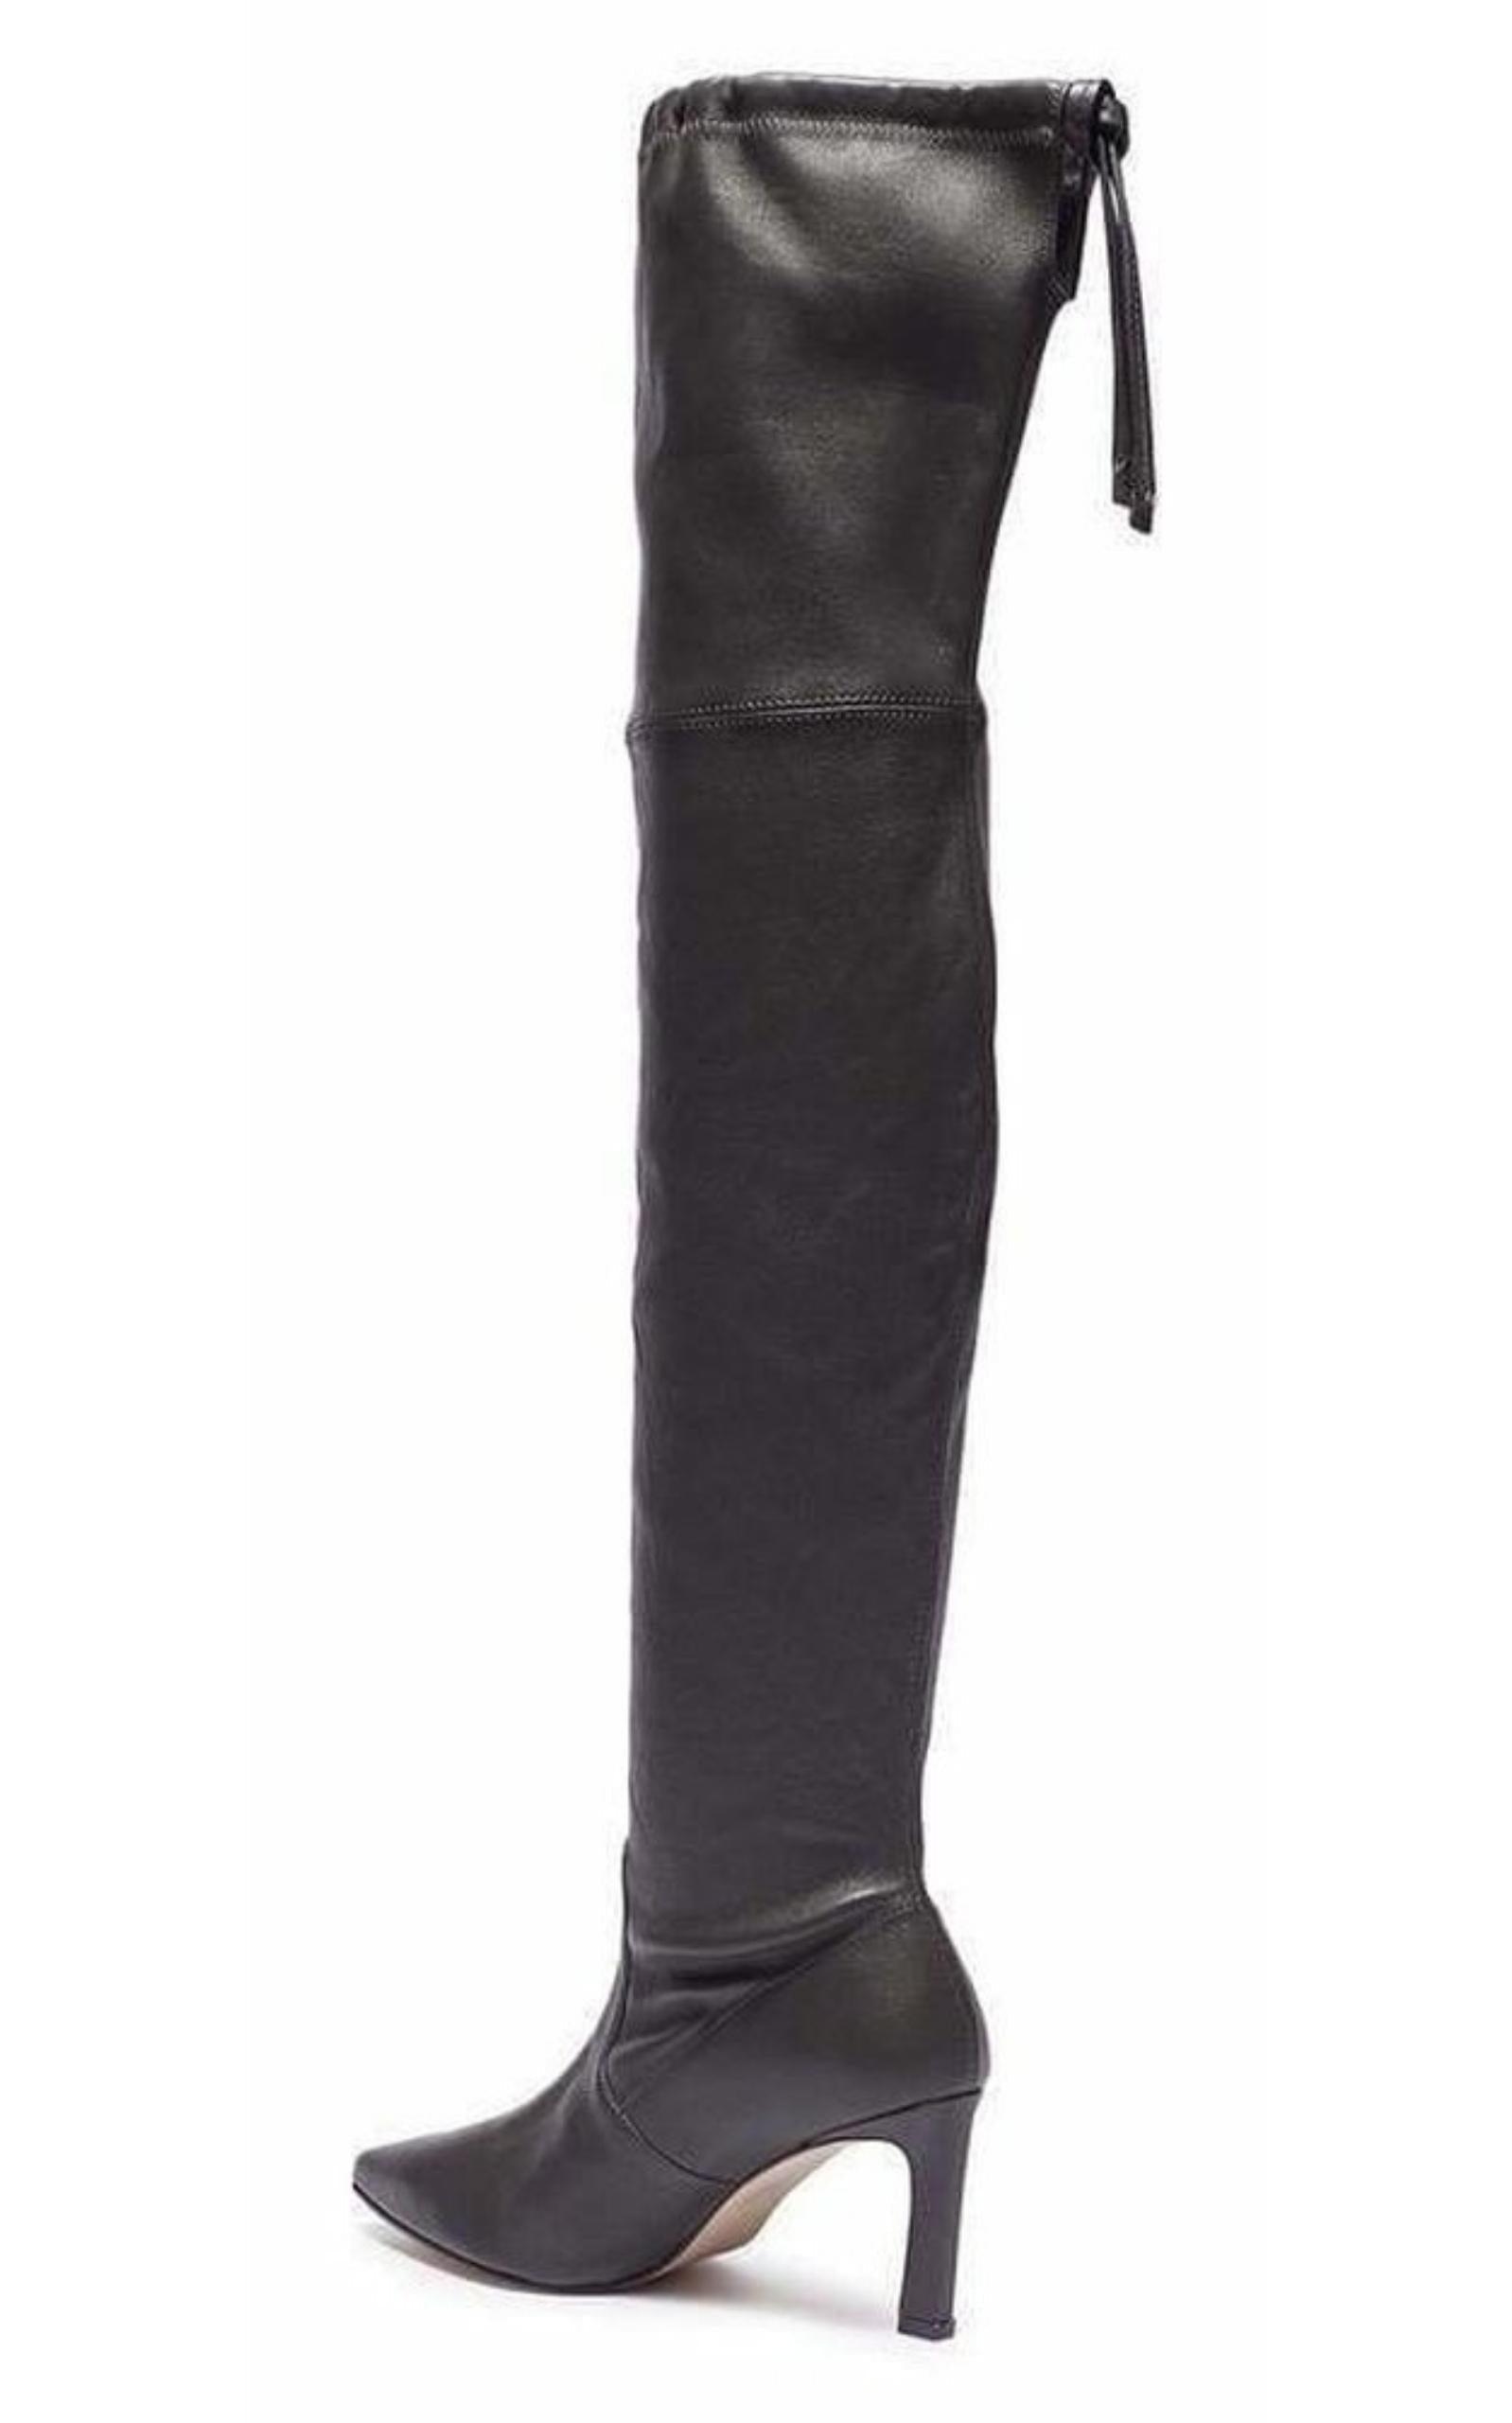 Natalia Over the Knee Length Stretch Leather Boots